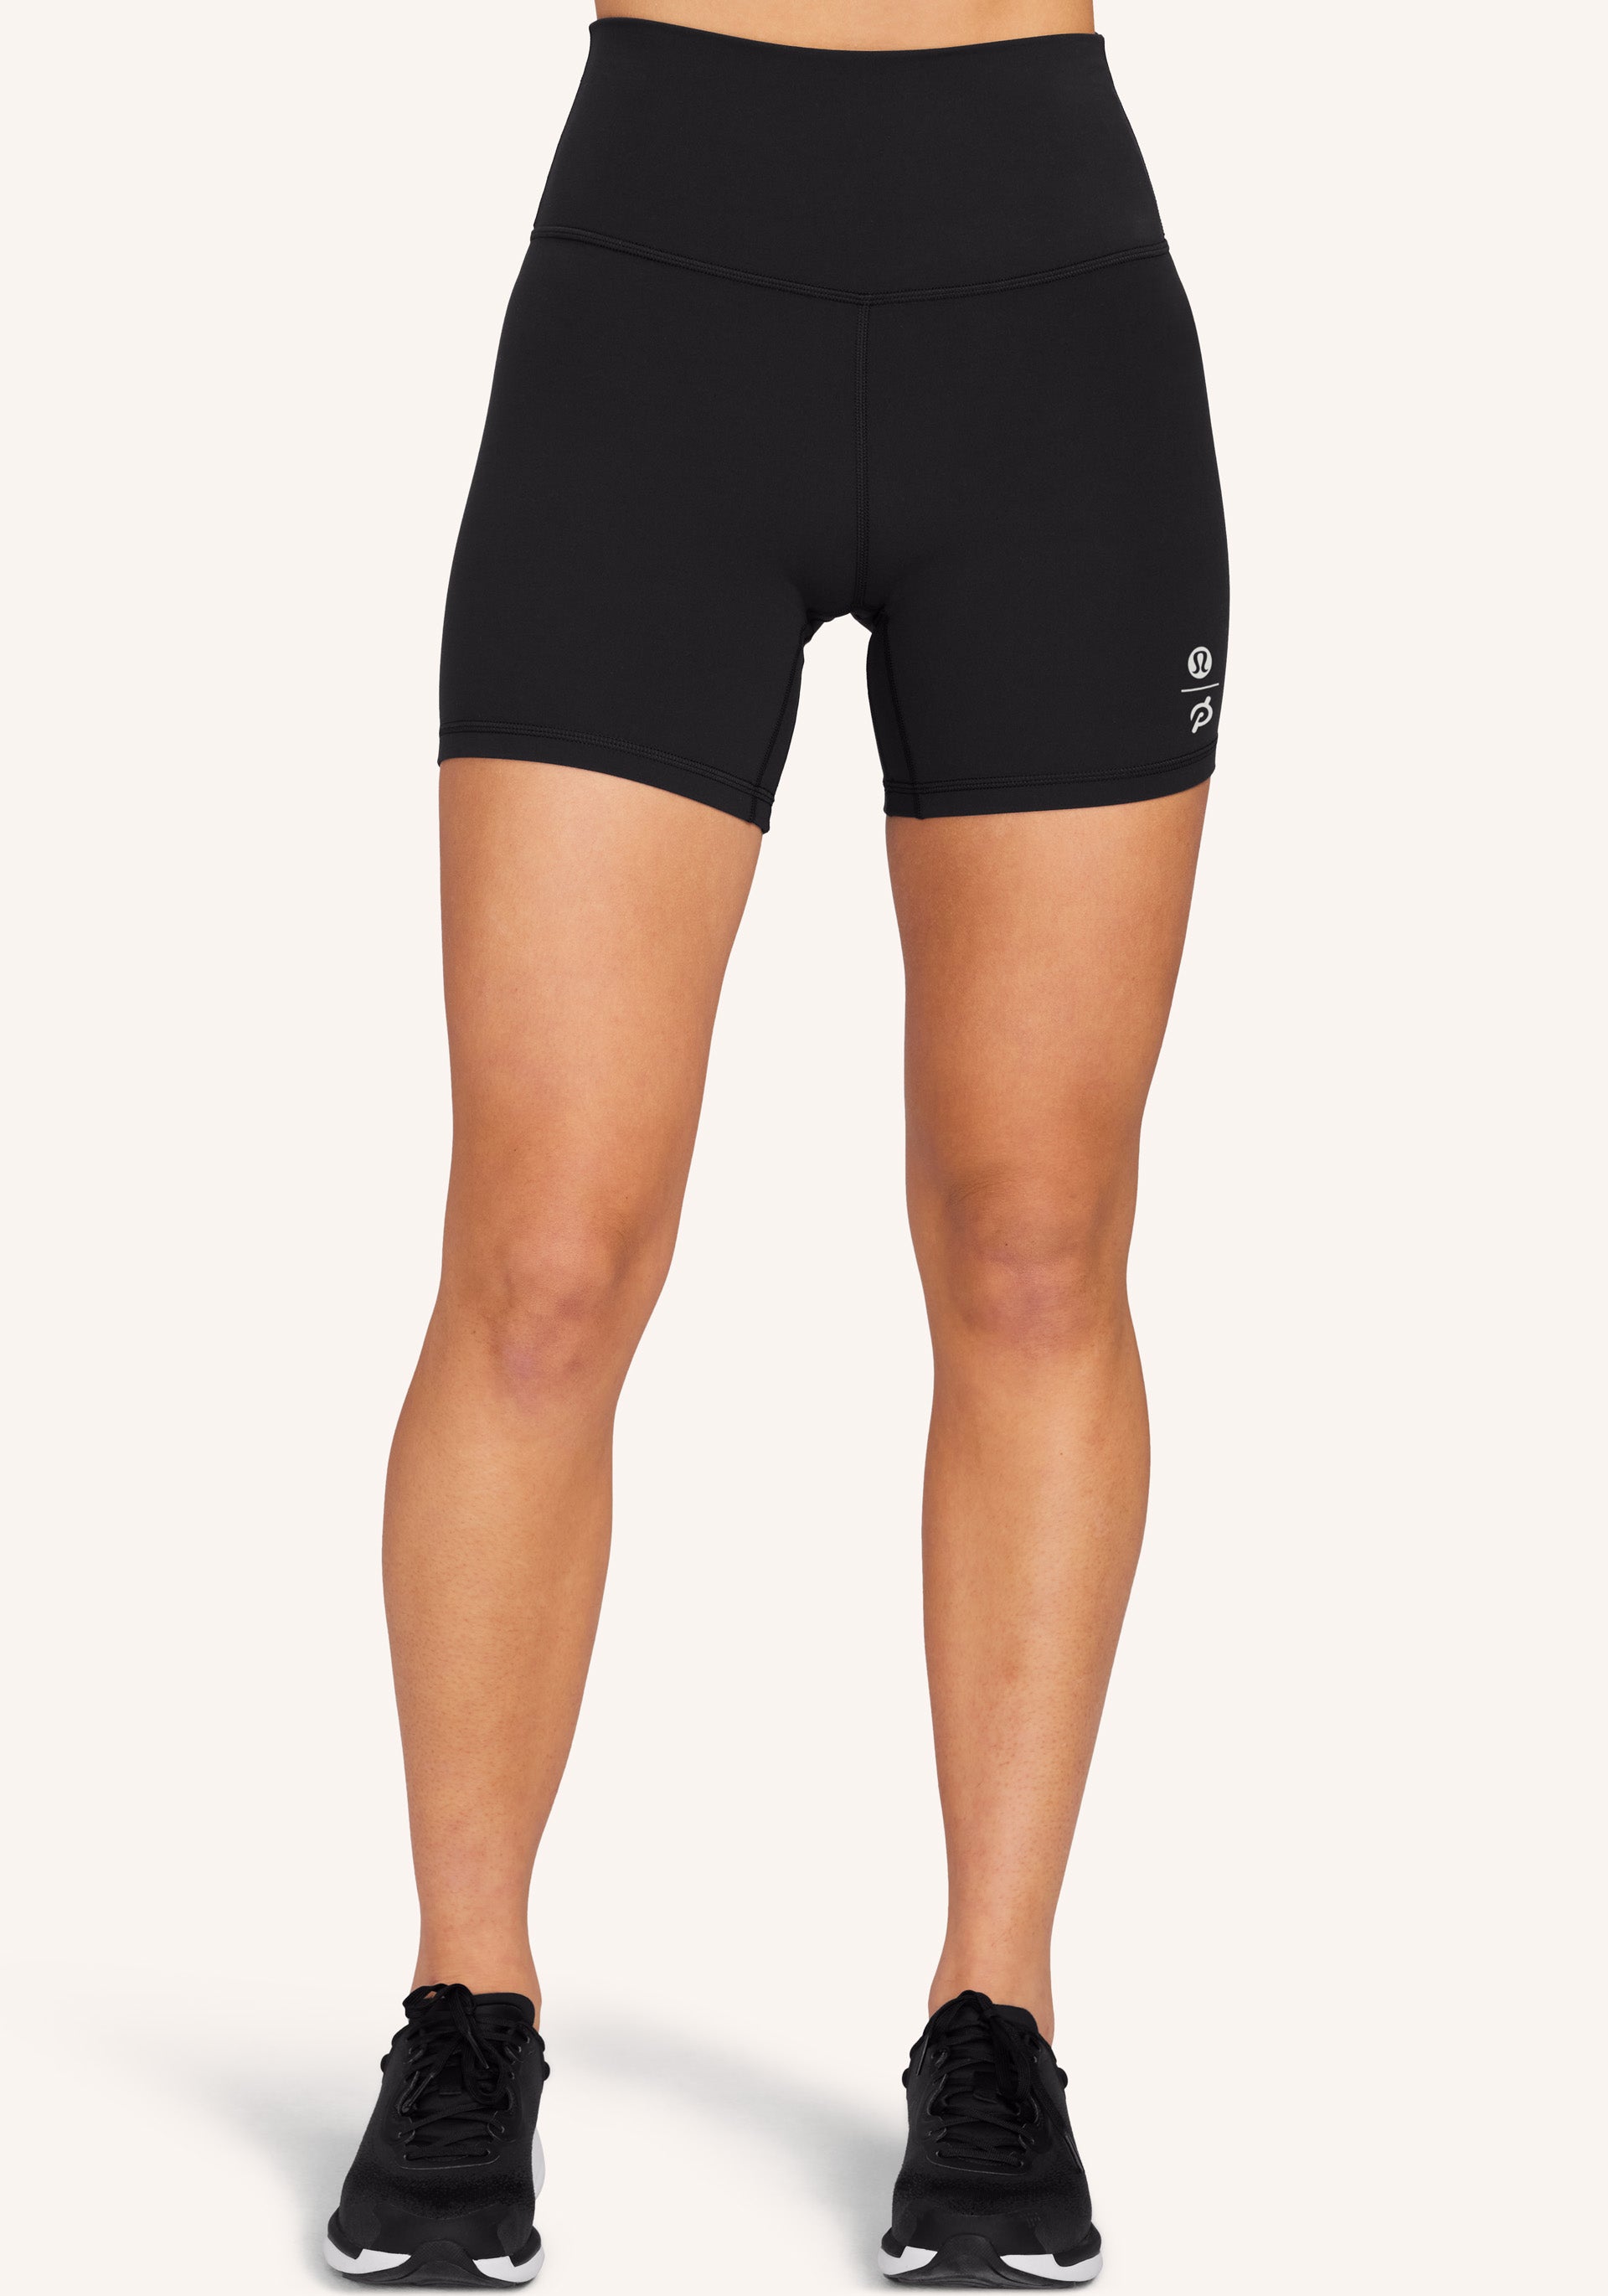 FTBS and Align shorts 6” in Saddle Brown : r/lululemon